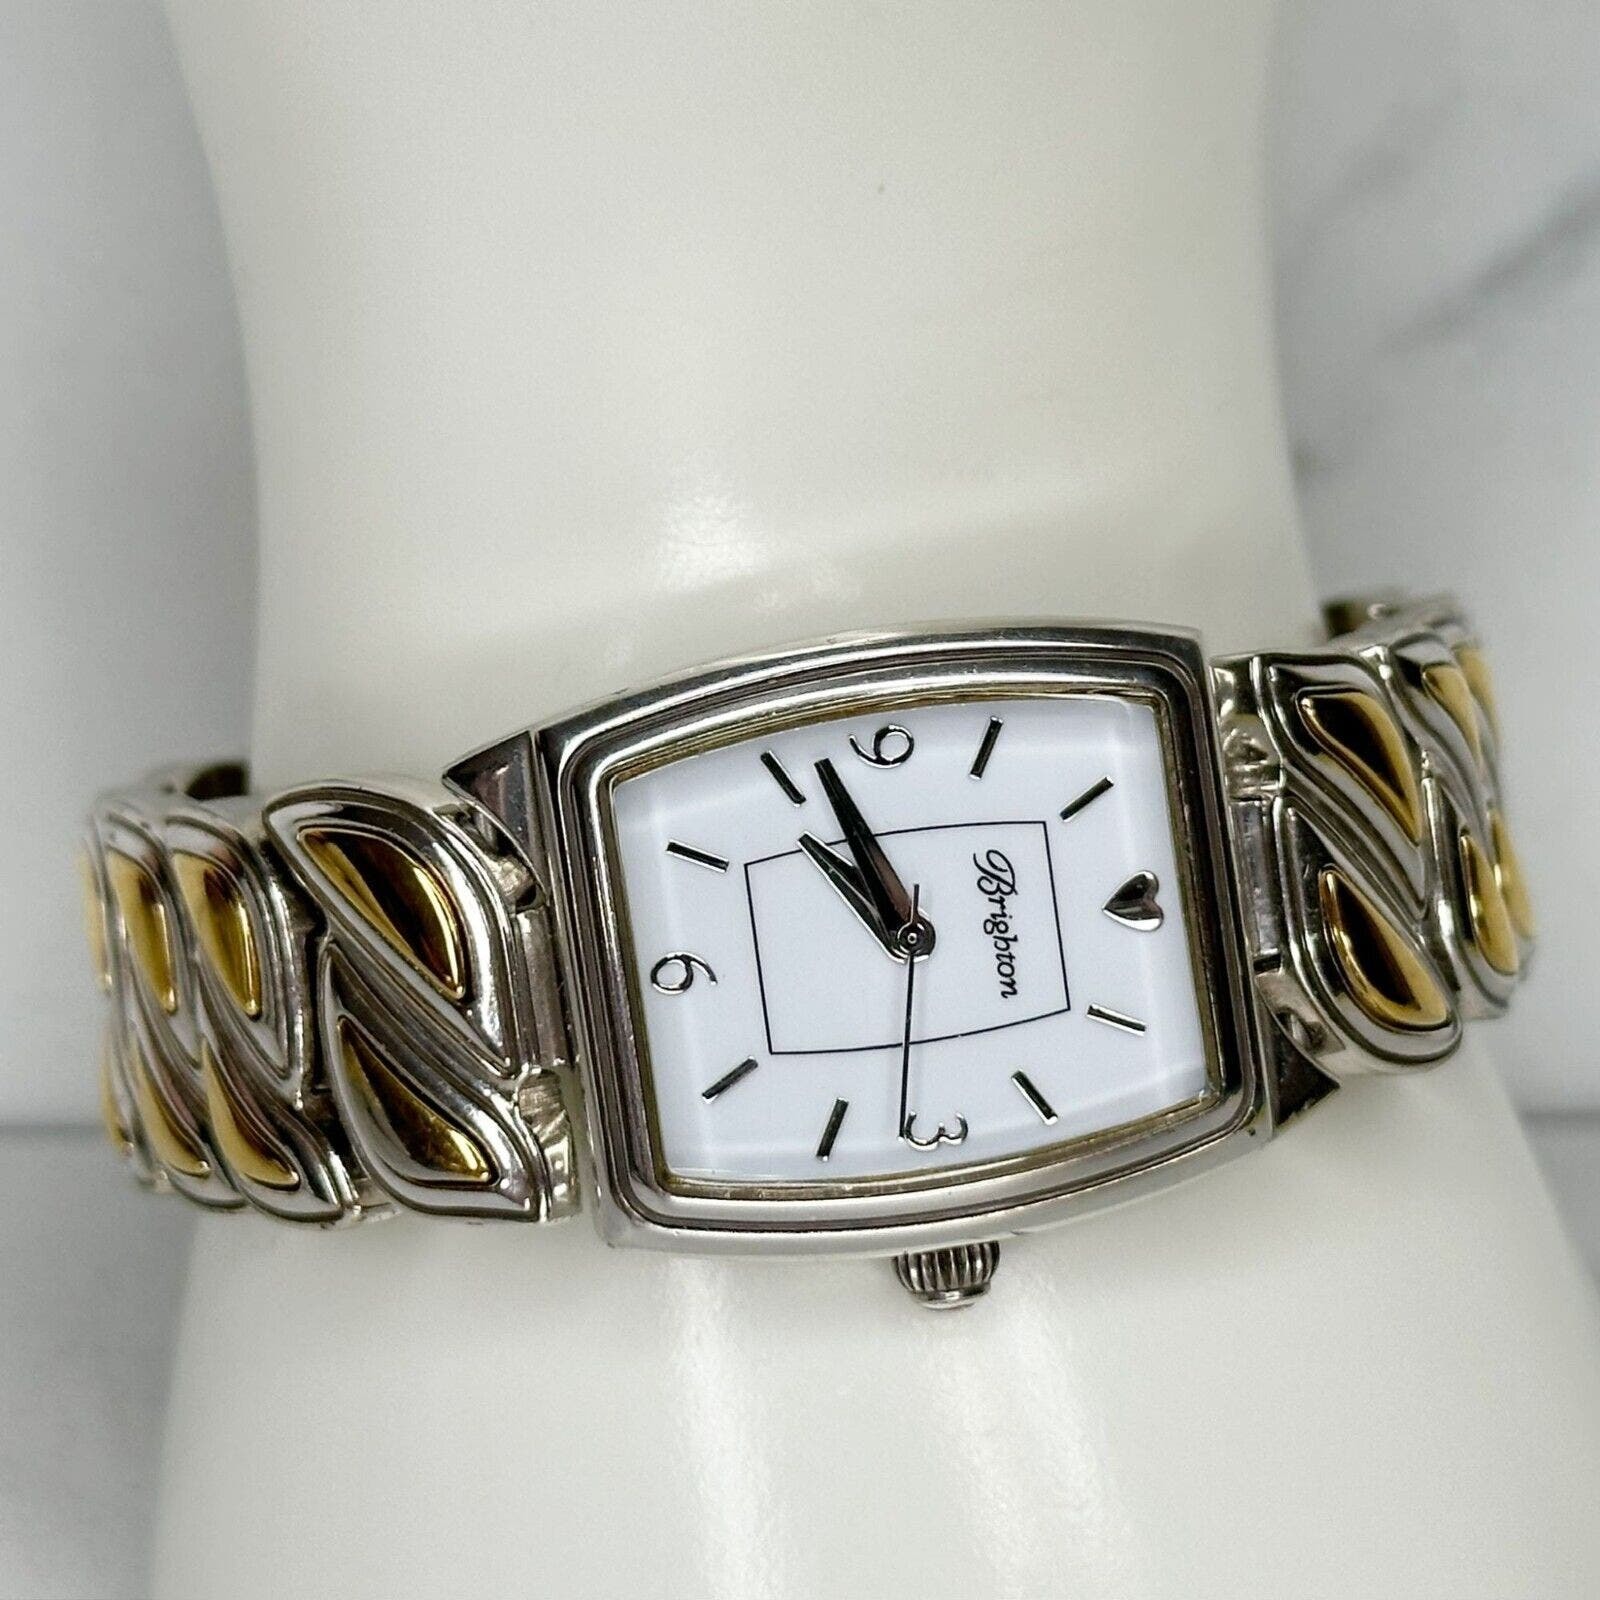 Brighton Coconut Grove Silver and Gold Tone Chain Link Bracelet Watch - $24.74